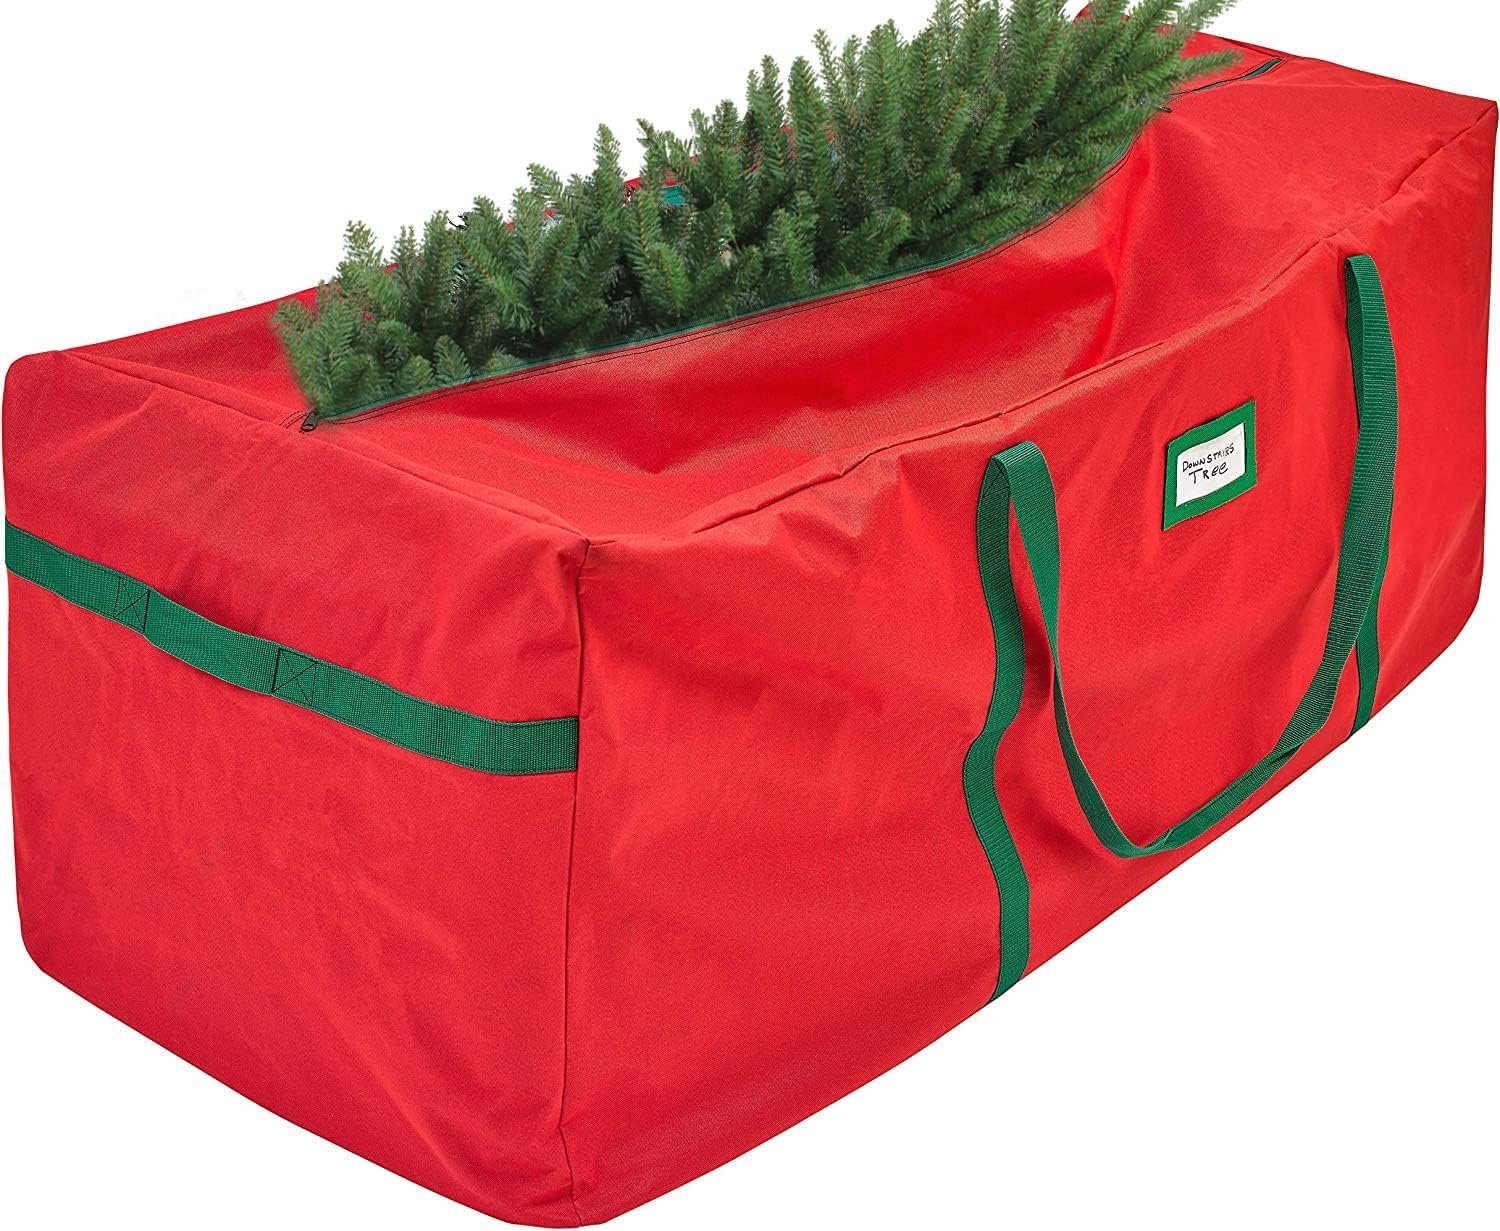 HOLDN’ STORAGE Christmas Tree Bag Heavy Duty 600D Oxford - Christmas Tree Bags Storage Fits Up To 9Ft, Waterproof Storage Bags with Reinforced Handles & Zipper.